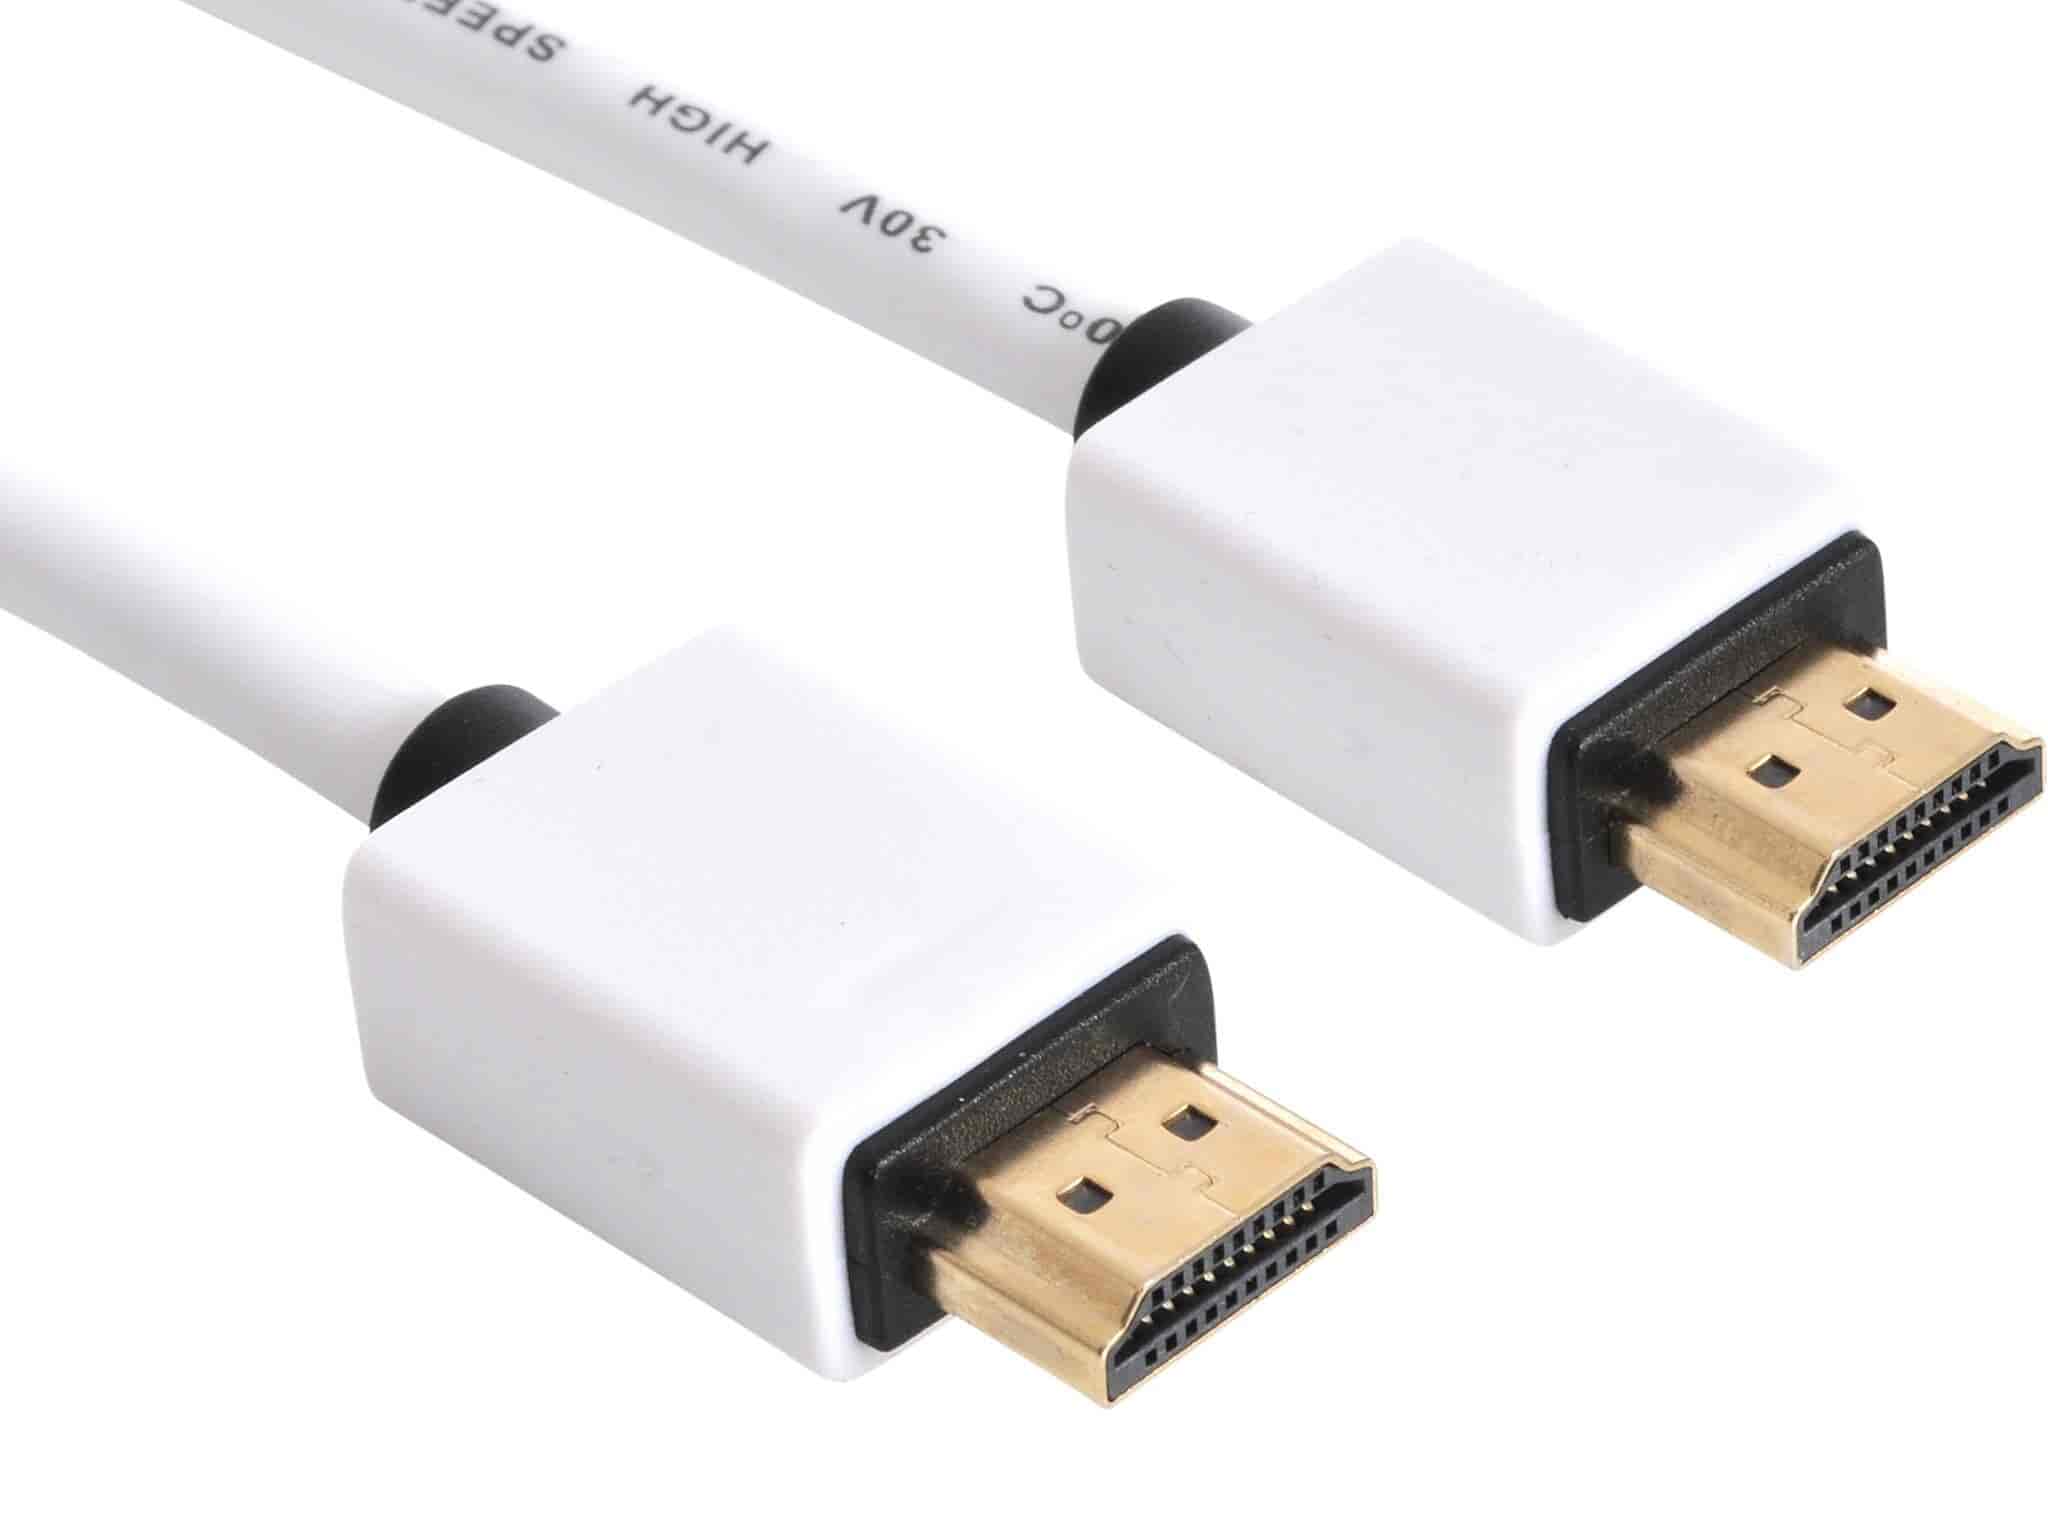 Sandberg HDMI 2.0, 3m SAVERYou can use this cable to connect HDMI devices like your DVD player or games console to your TV with an HDMI connector.Sandberg